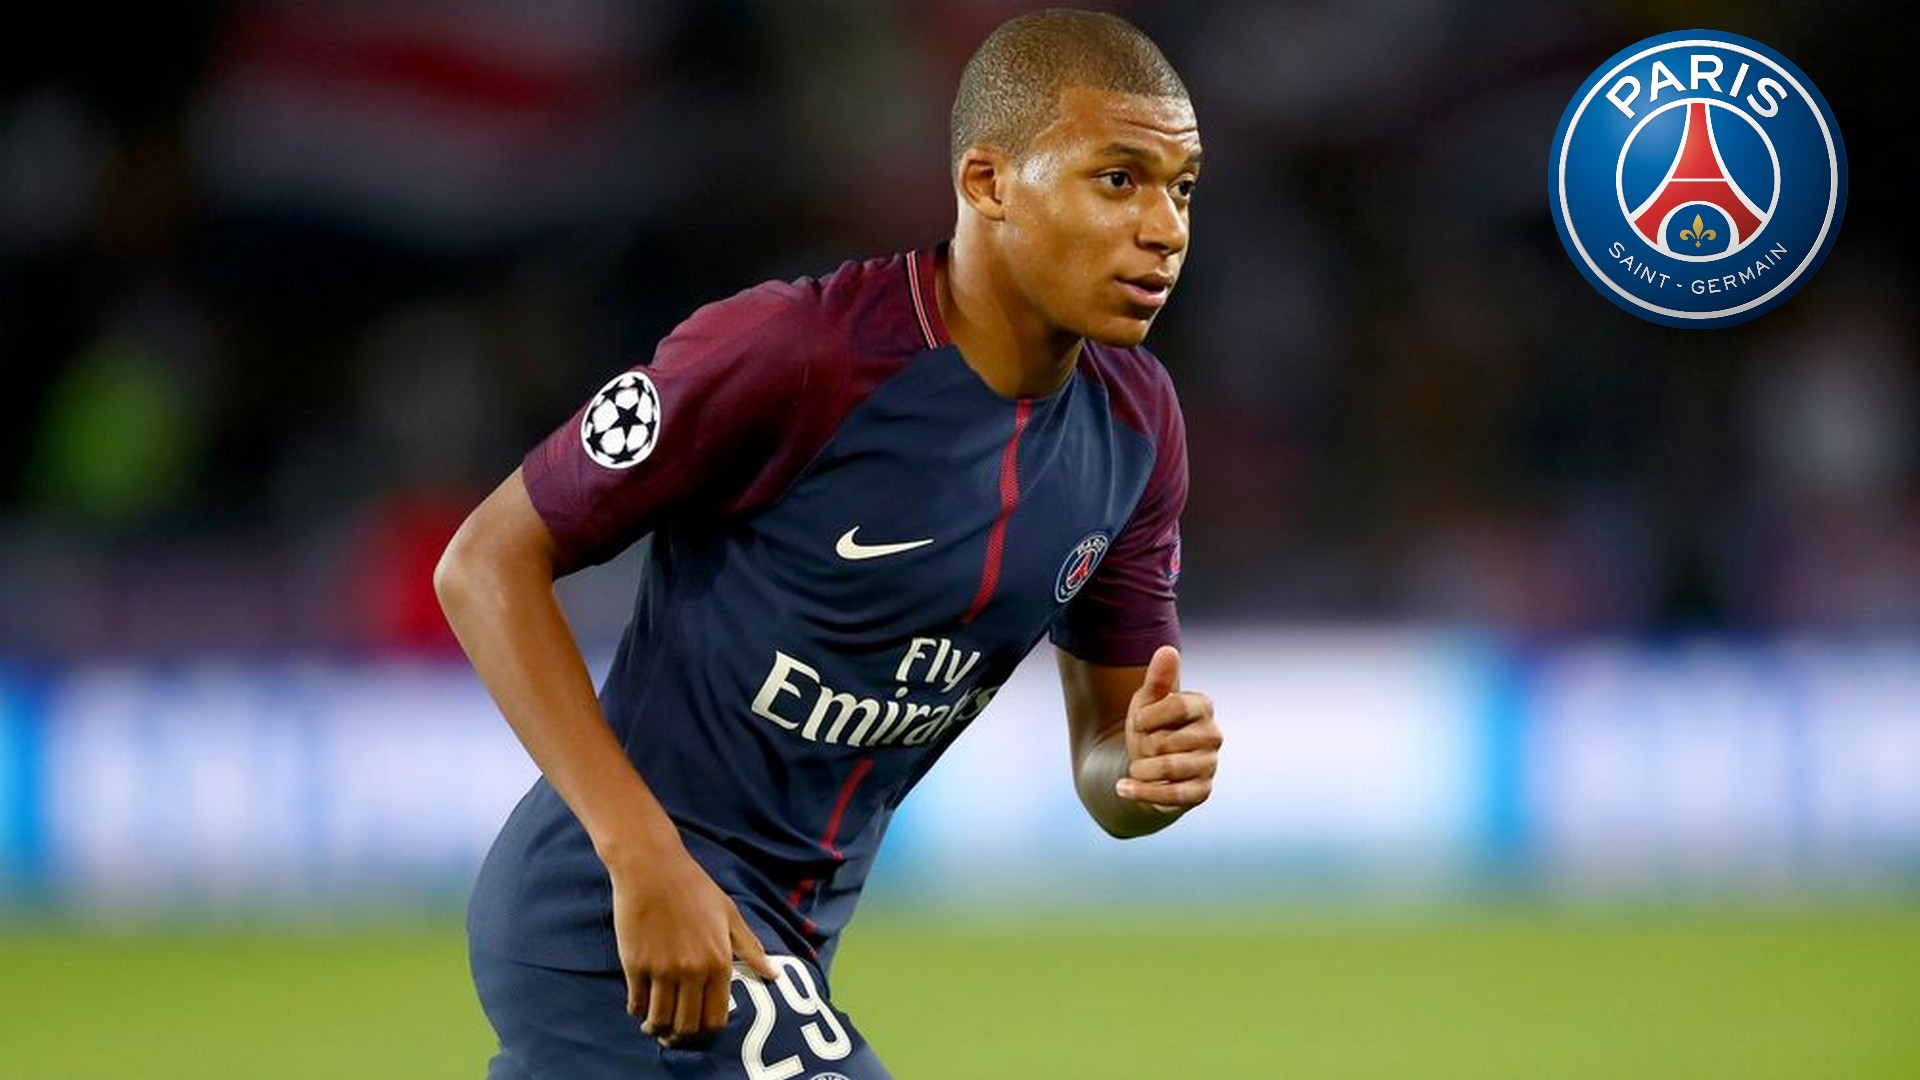 Wallpapers HD Mbappe Paris Saint-Germain With Resolution 1920X1080 pixel. You can make this wallpaper for your Mac or Windows Desktop Background, iPhone, Android or Tablet and another Smartphone device for free